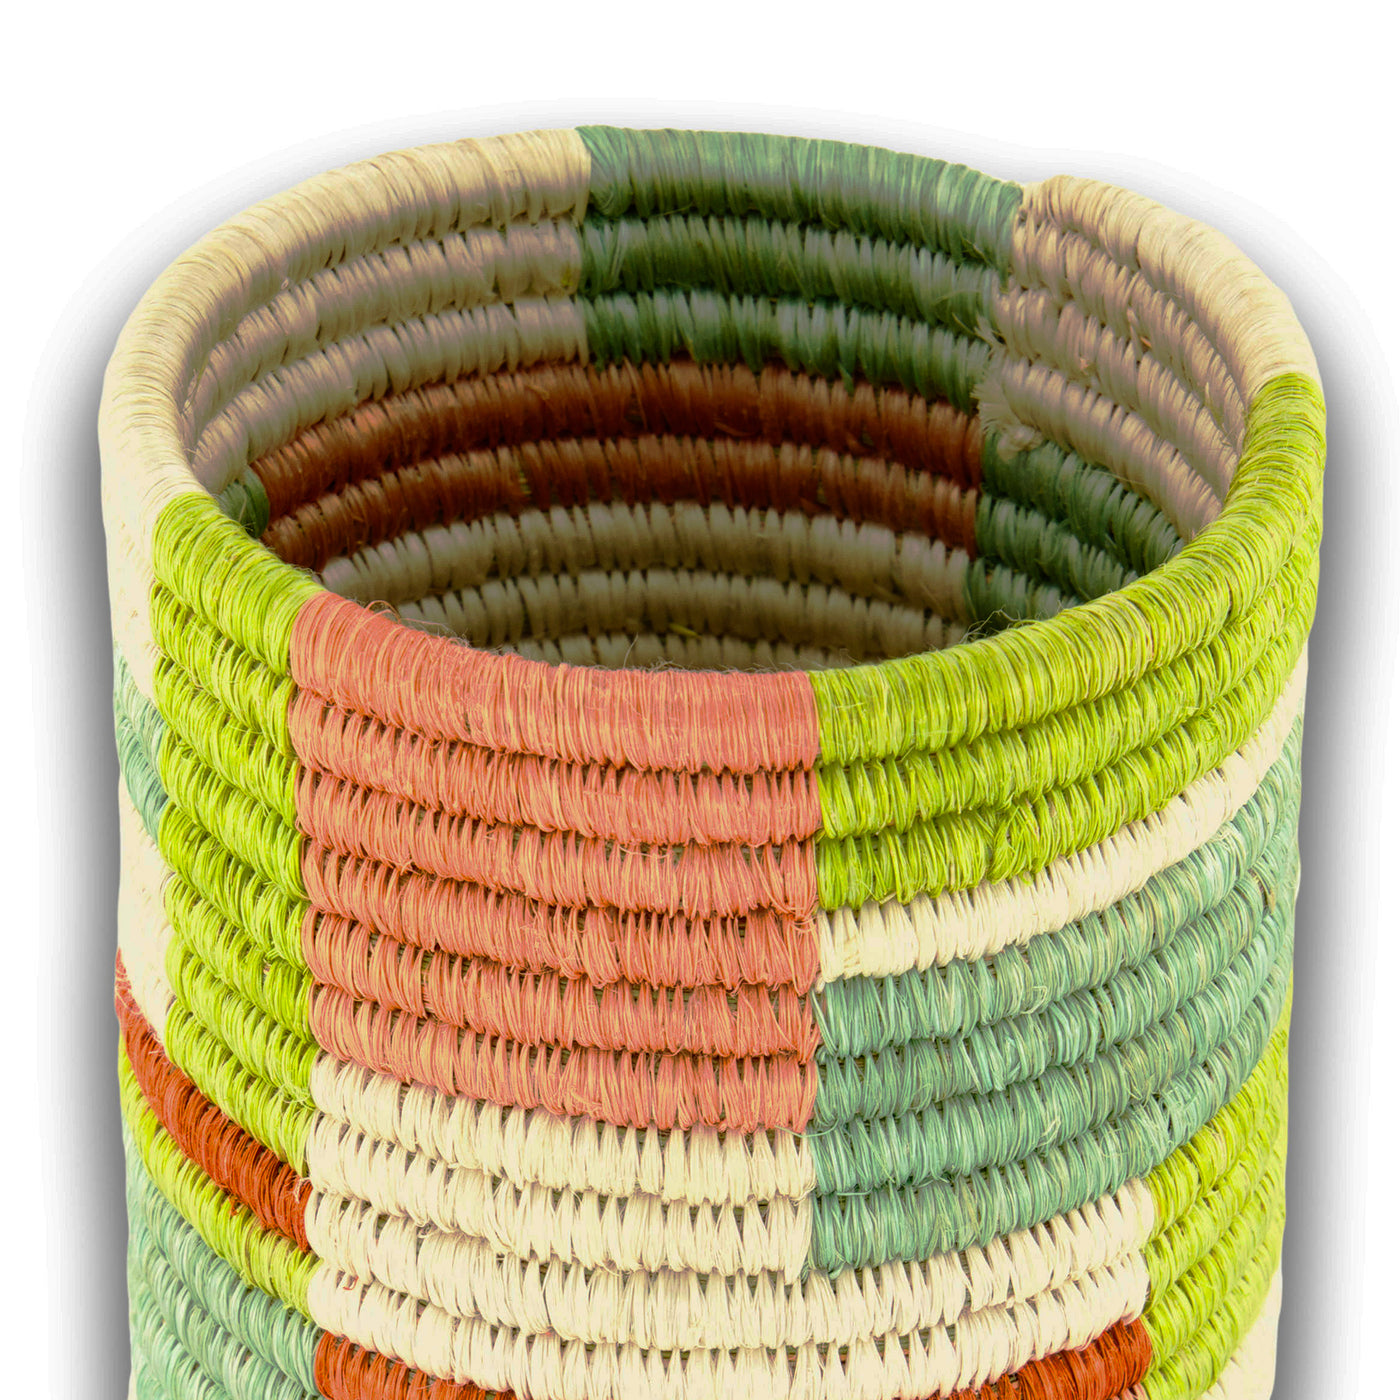 Town Square Vessel - 8" Patchwork Cylinder